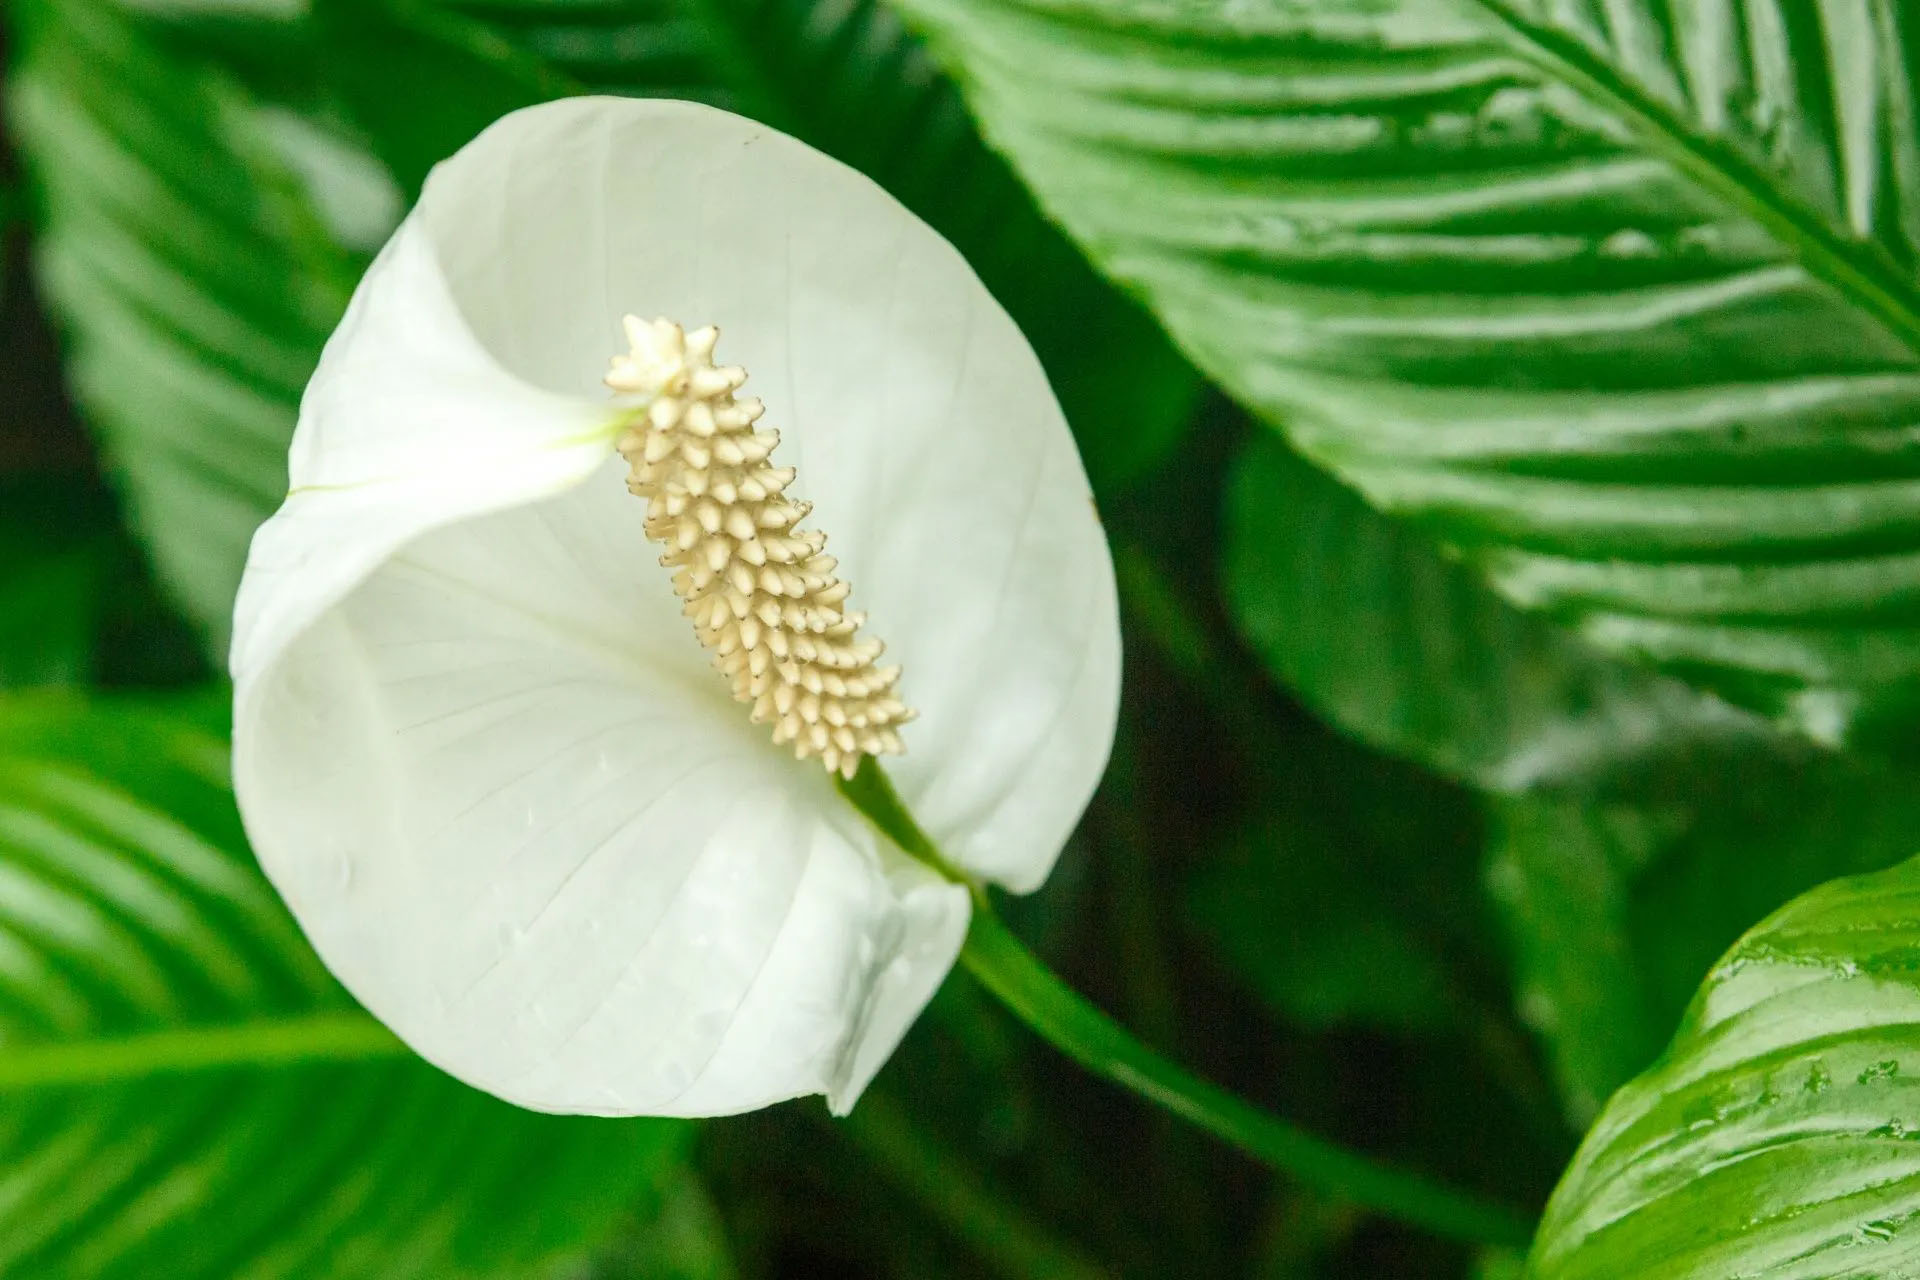 What are peace lilies?